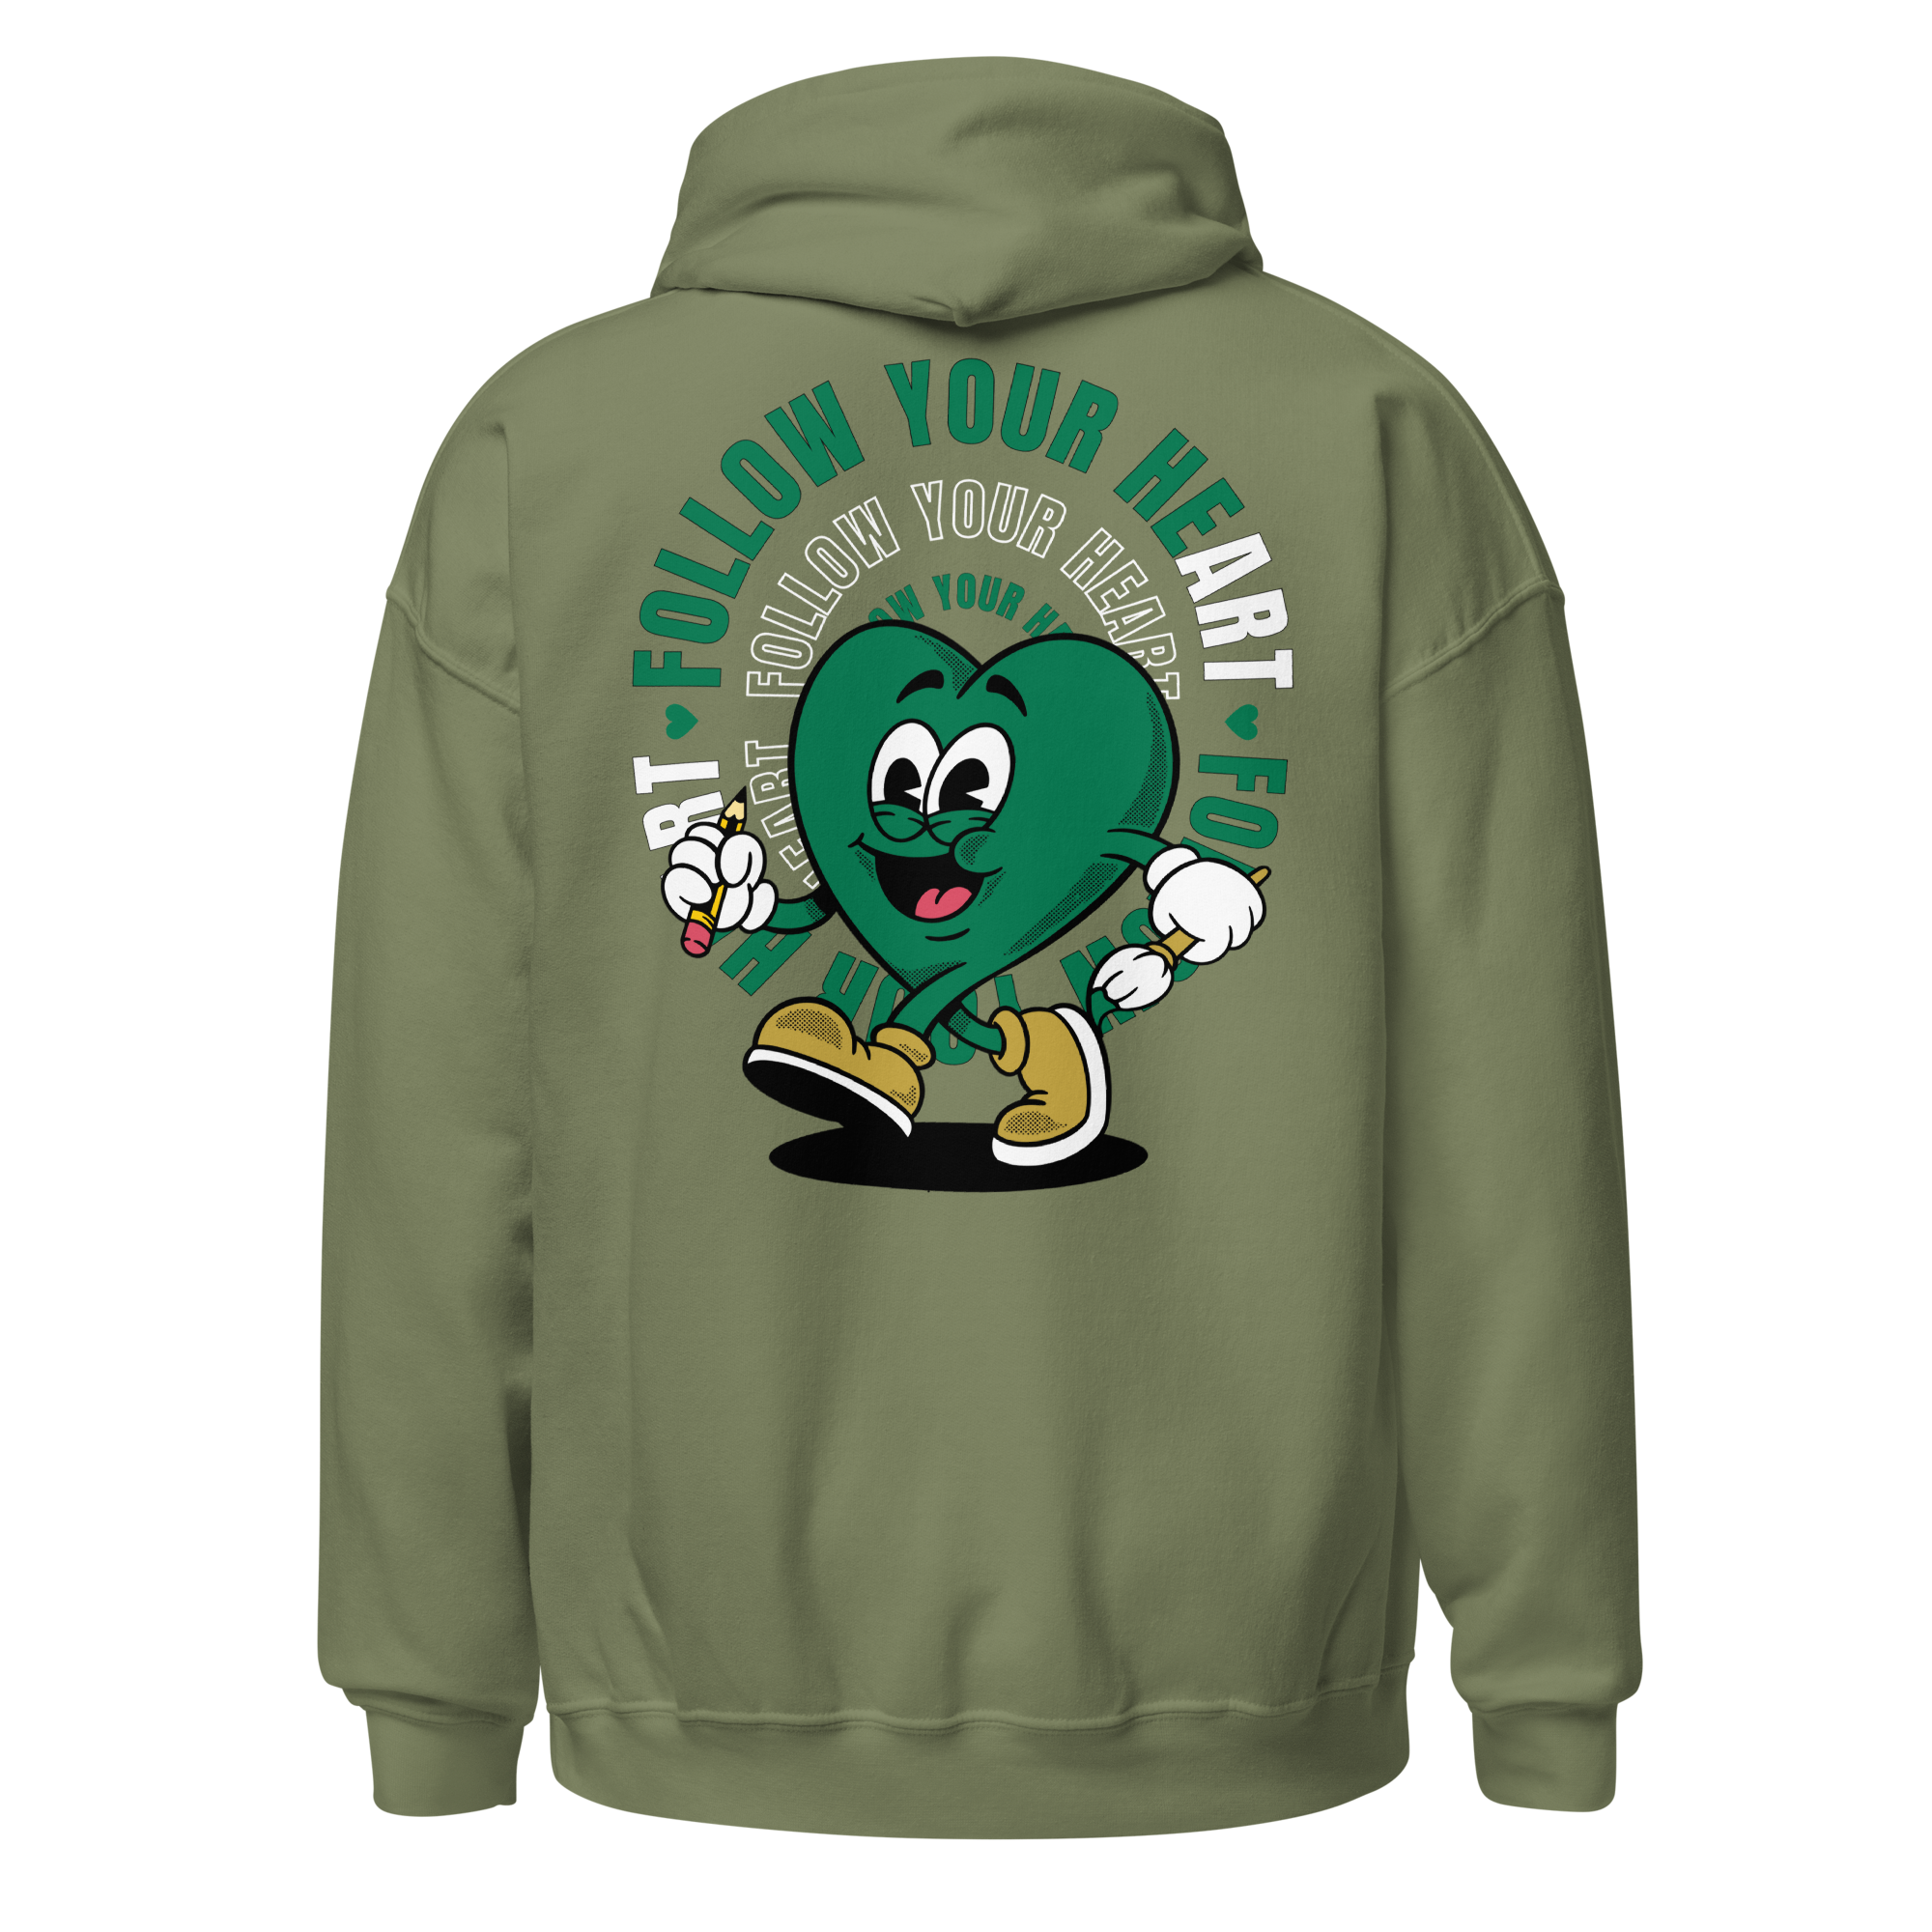 Follow Your Heart Embroidery Hoodie - Green and Military Green (Unisex)